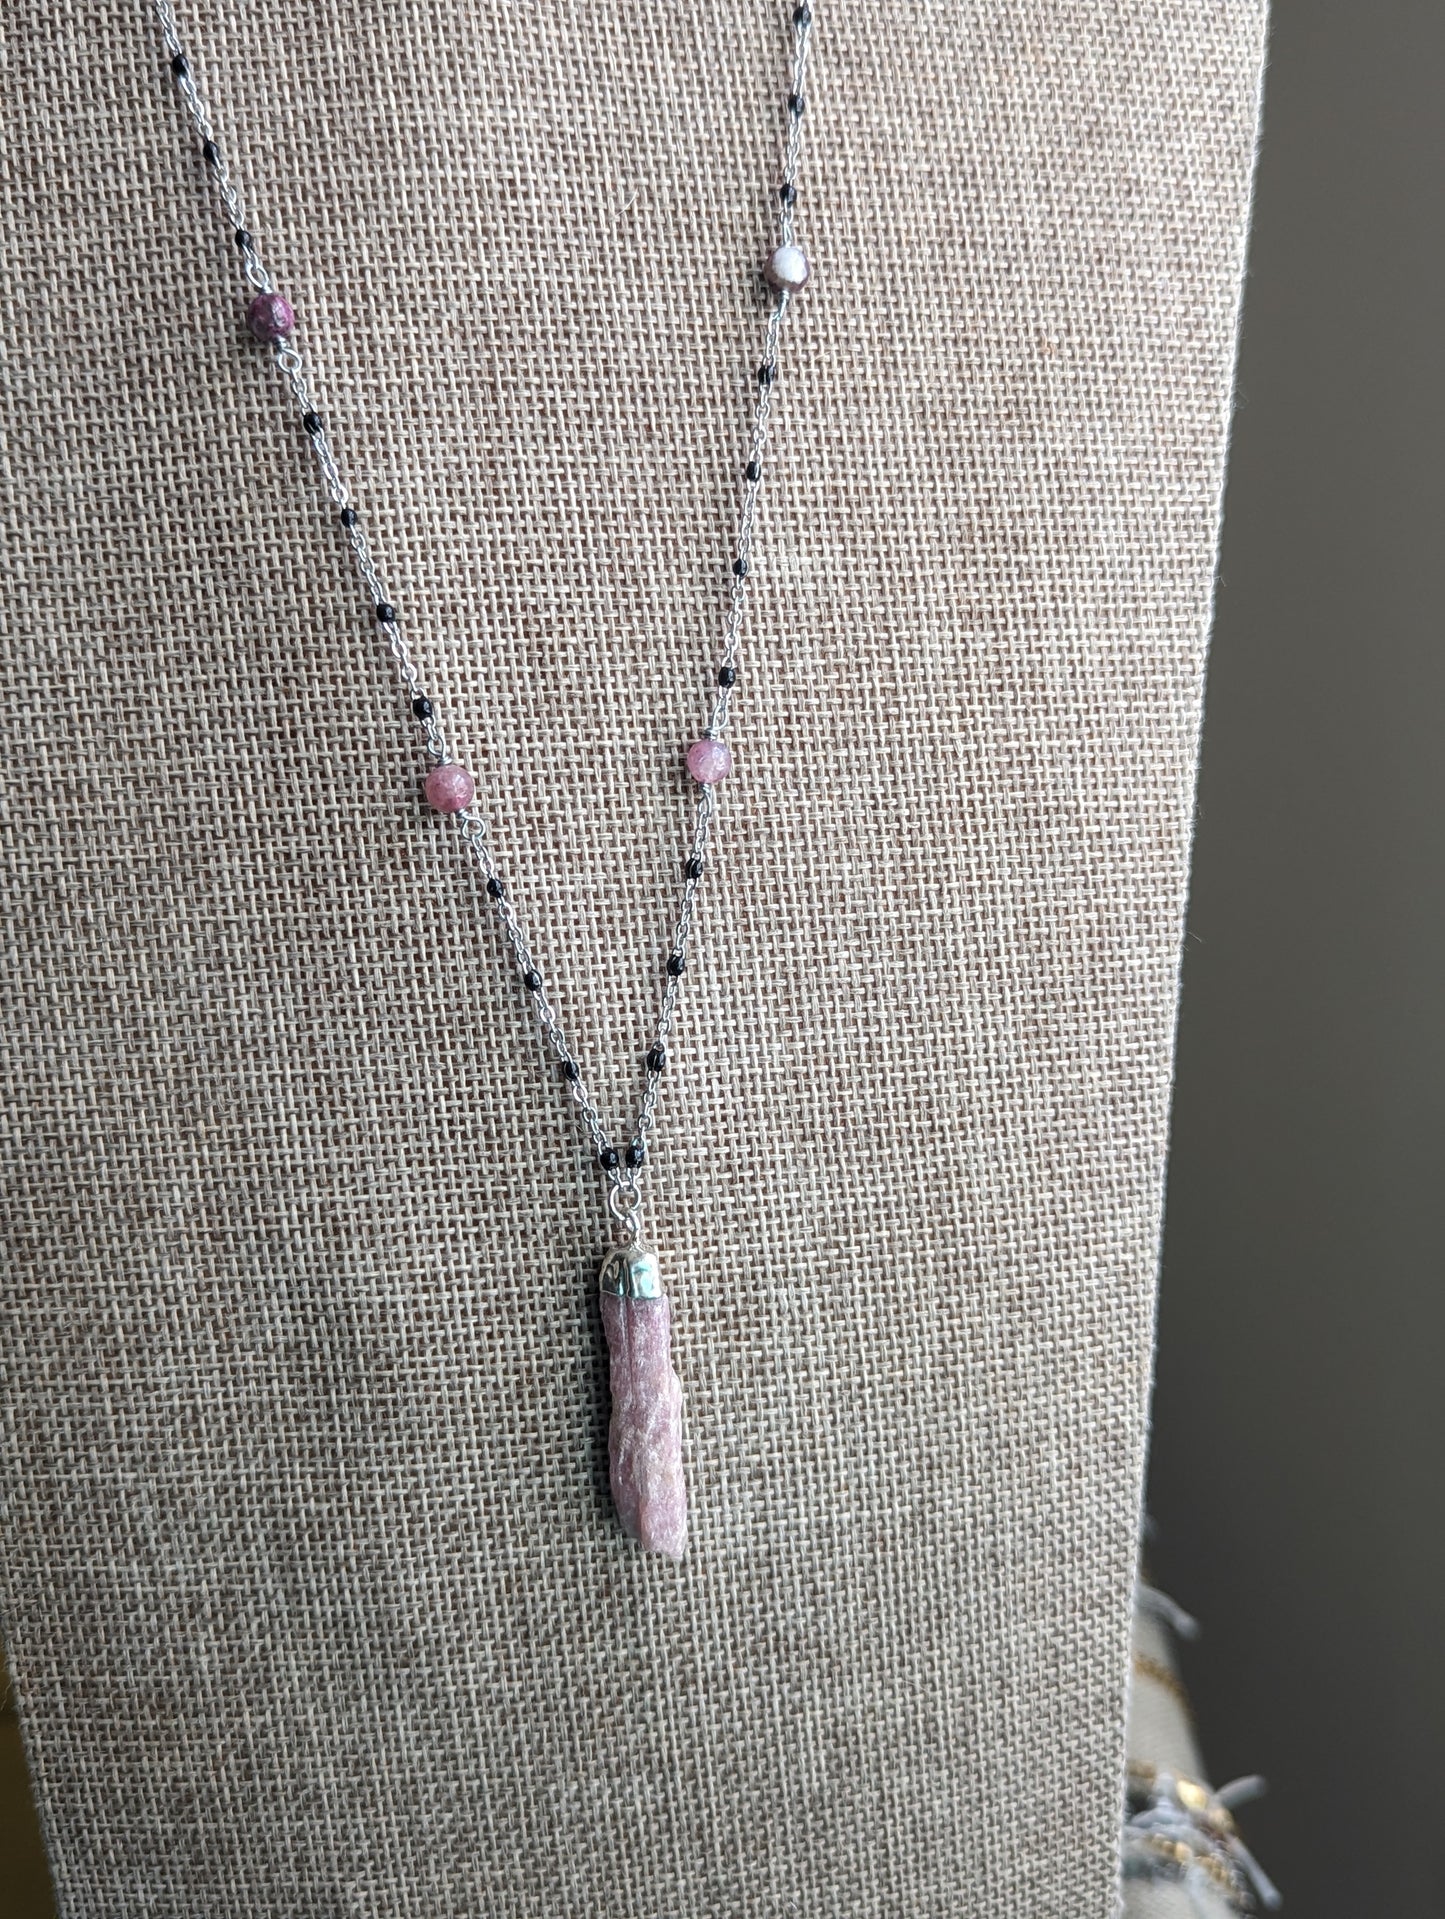 Raw Pink Tourmaline on Beaded Stainless/Black Enamel Necklace